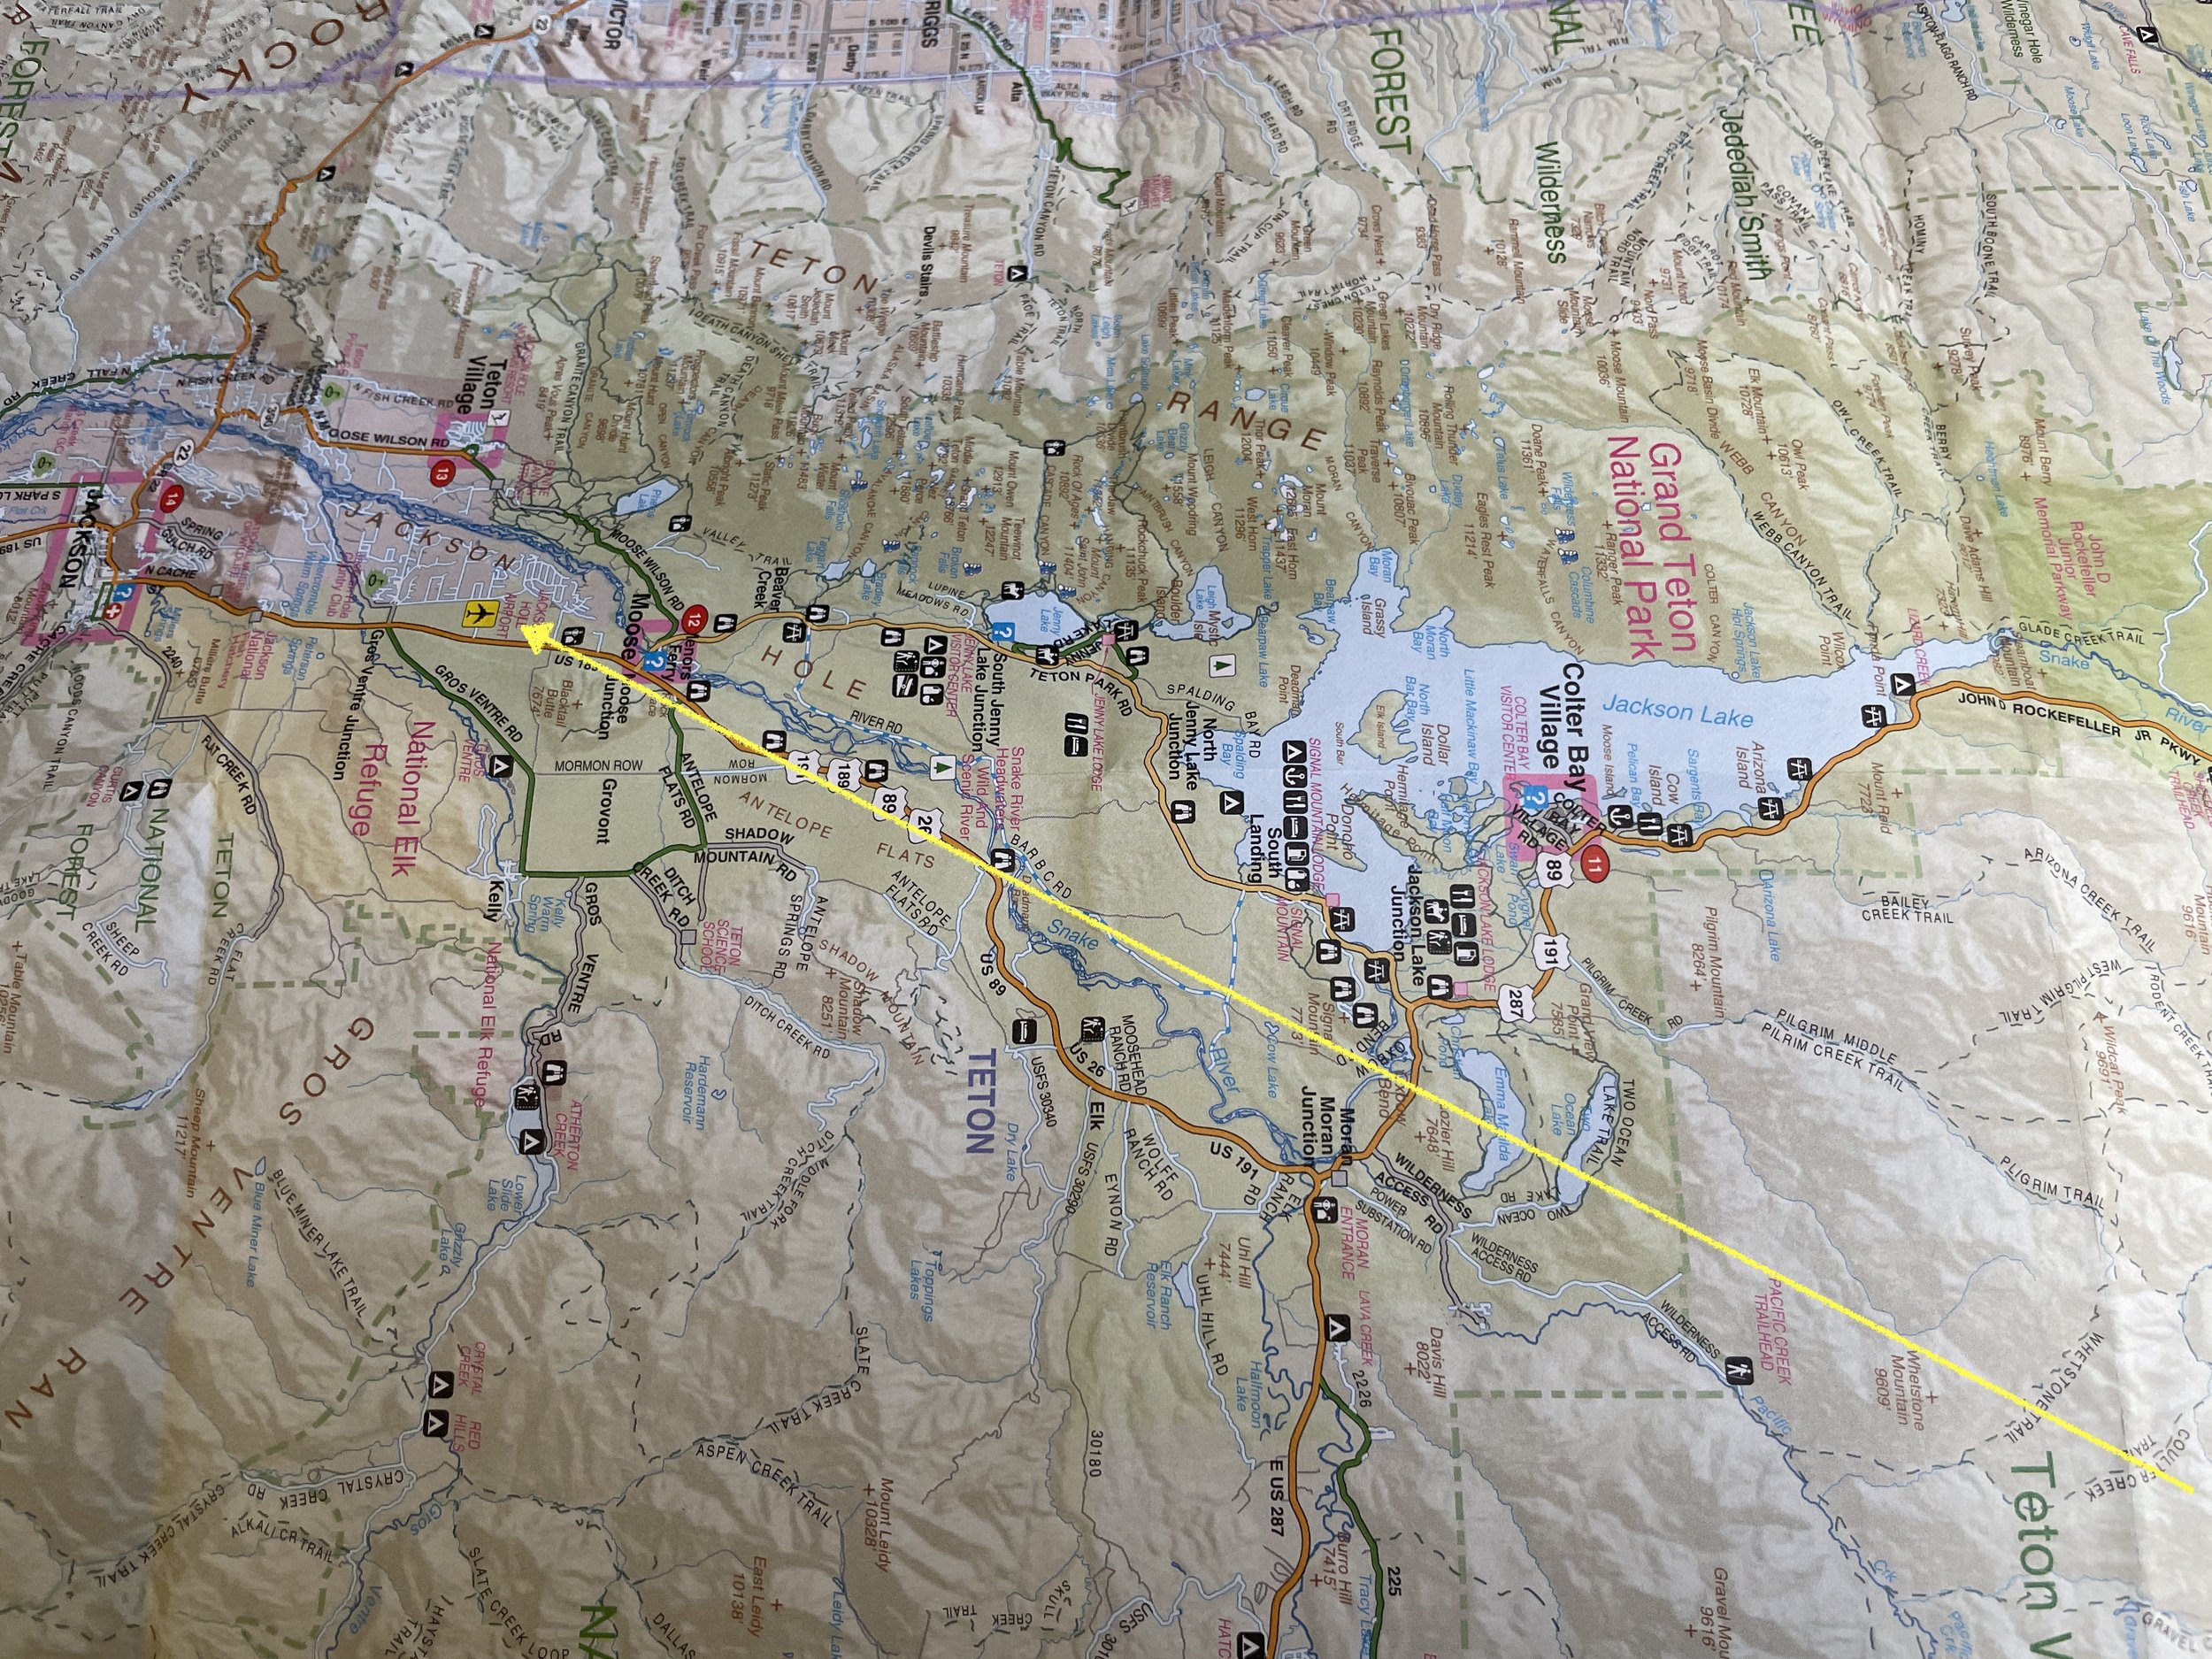  The approximate approach to Jackson Hole Airport (JAC).  JAC is the only commercial airport in the United States located inside a national park, in this case Grand Teton. 